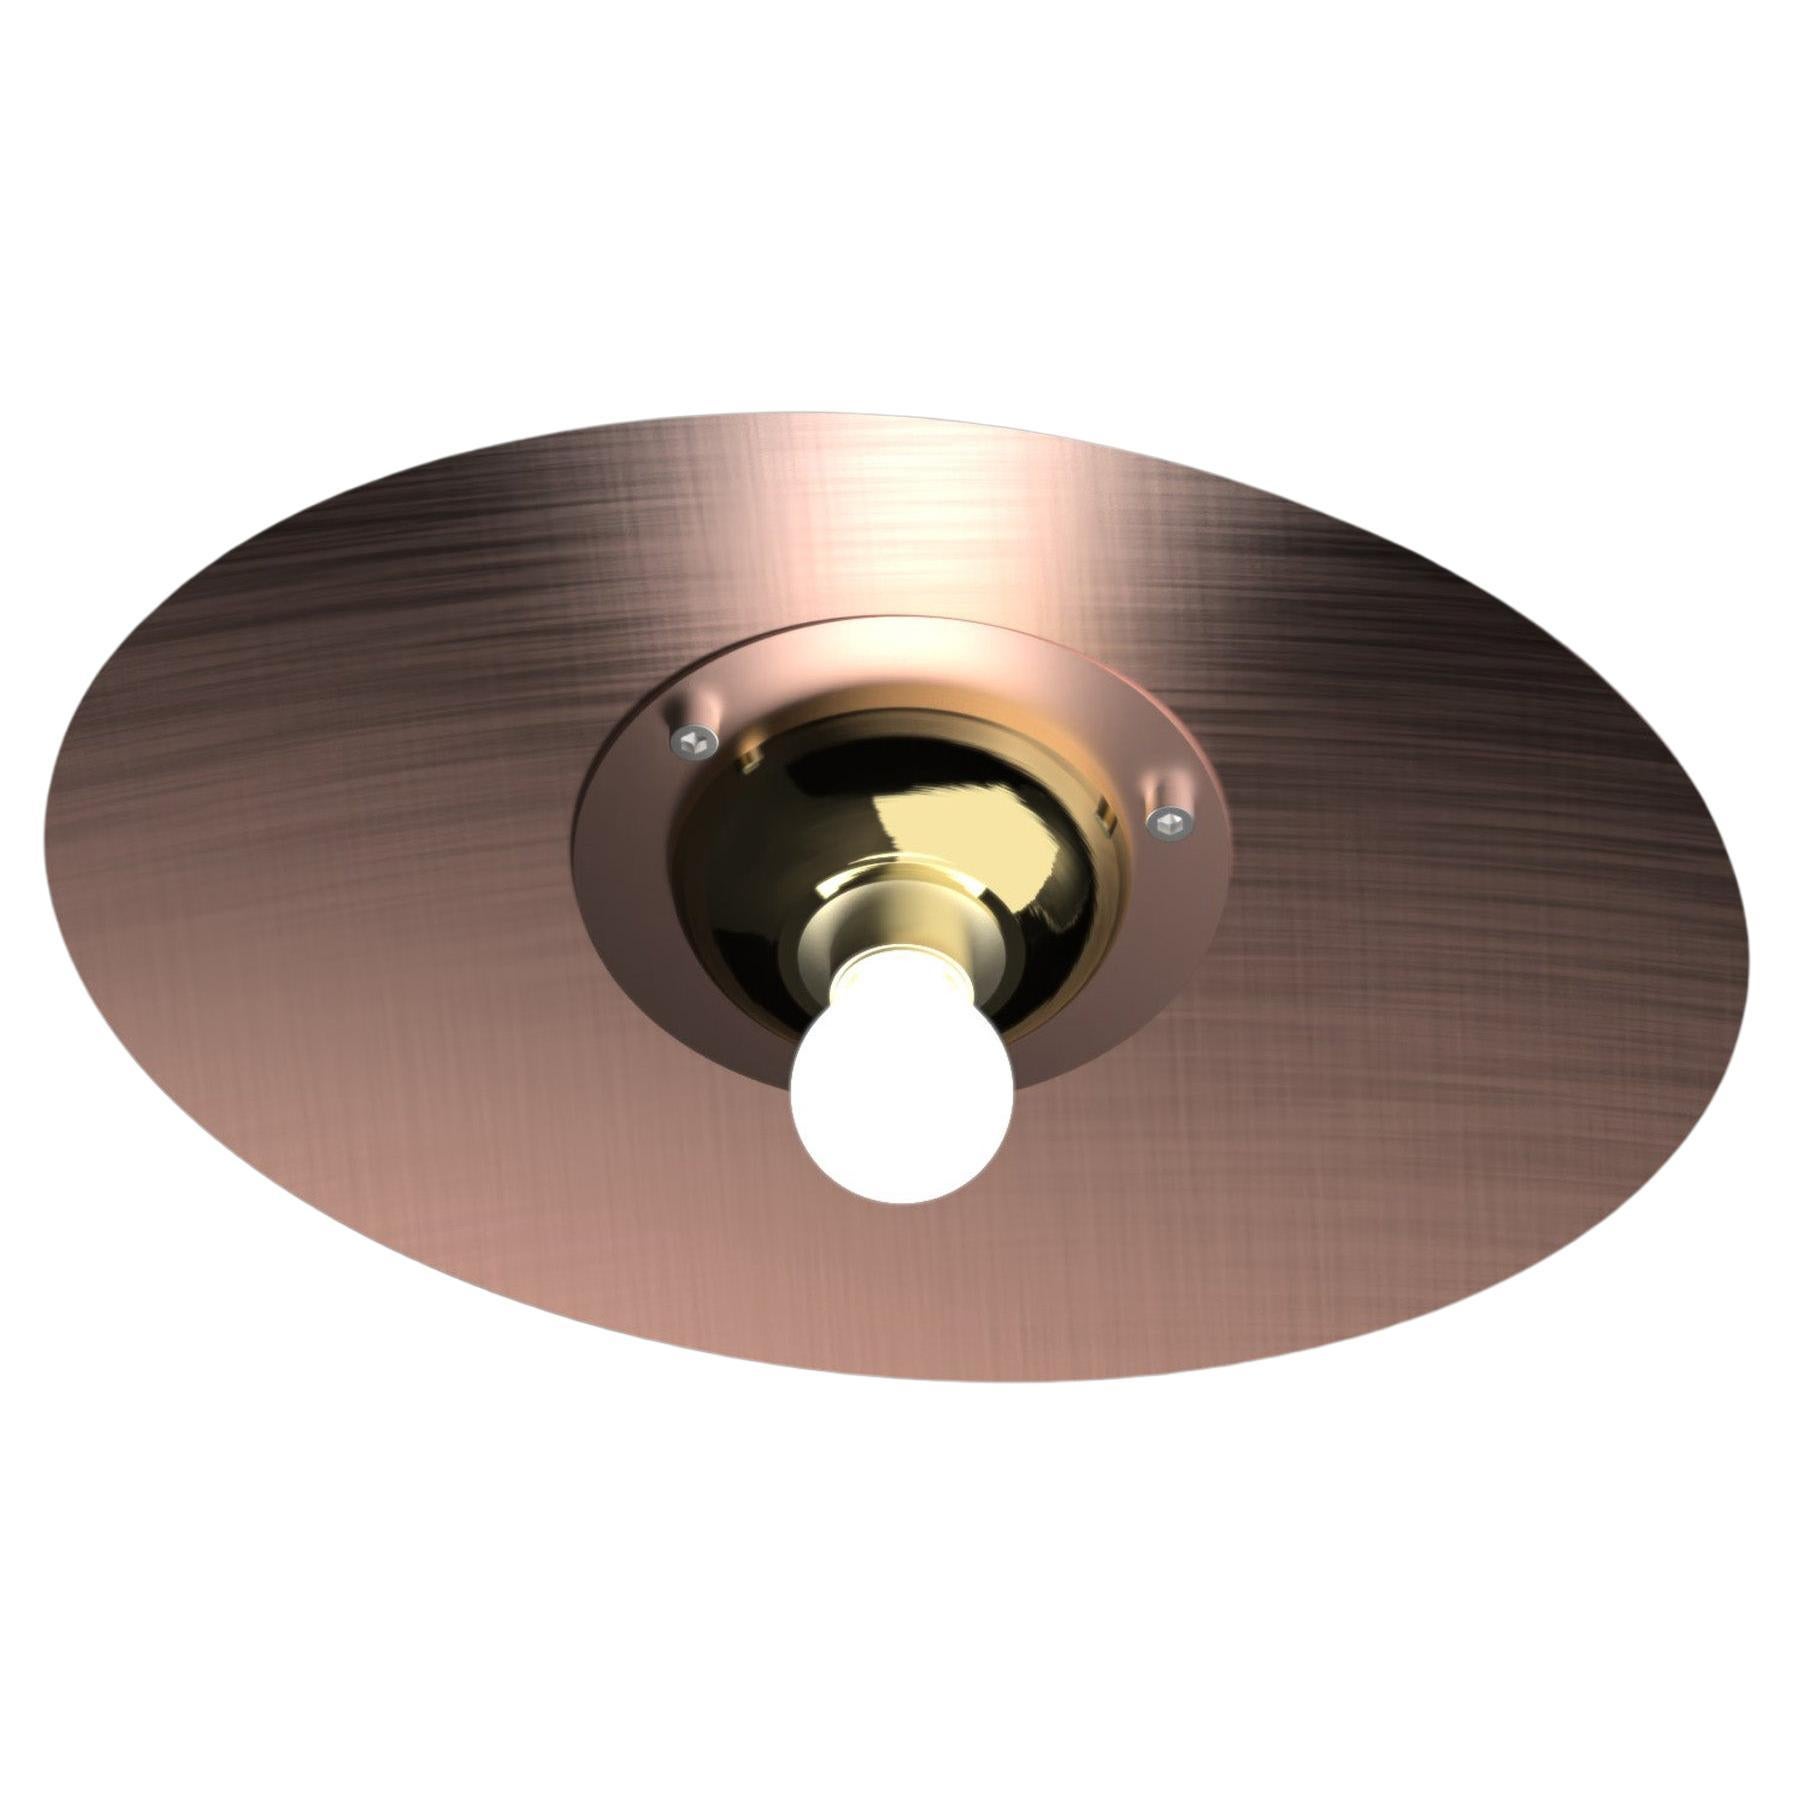 Edimate Genuine Copper Brass Industrial Style Ceiling Light Version 1 For Sale